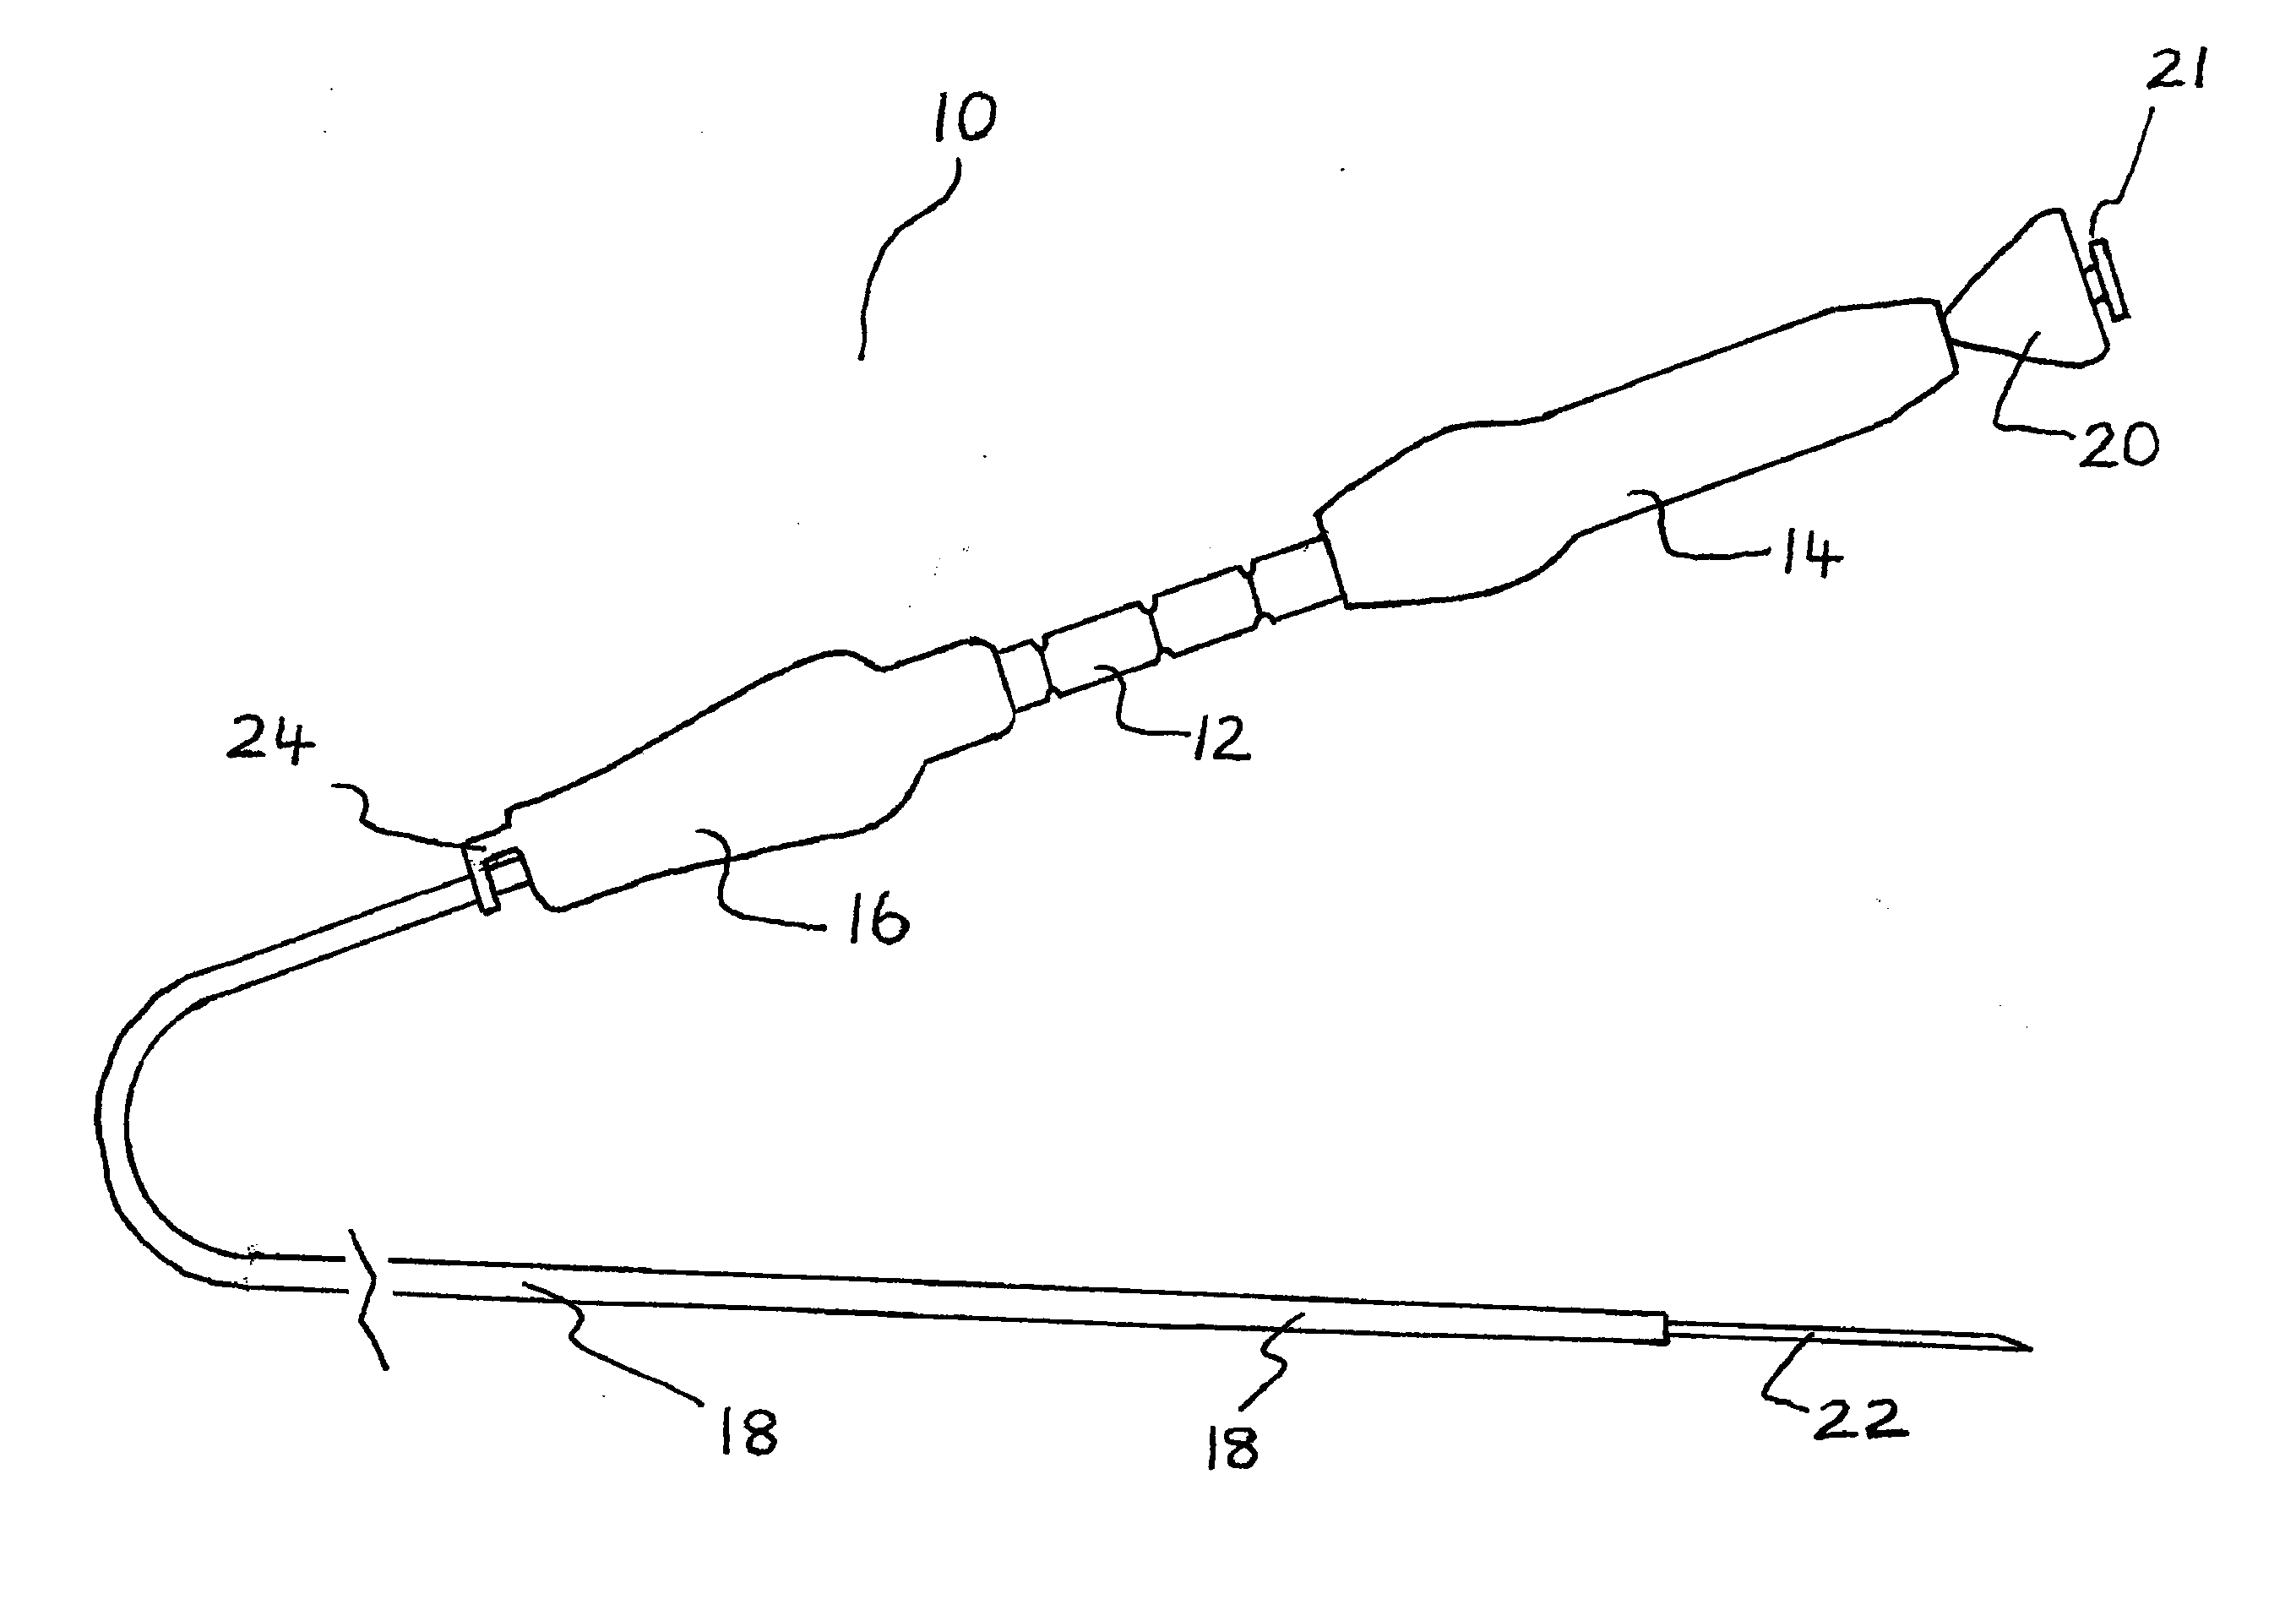 Rapid exchange fna biopsy device with diagnostic and therapeutic capabilities